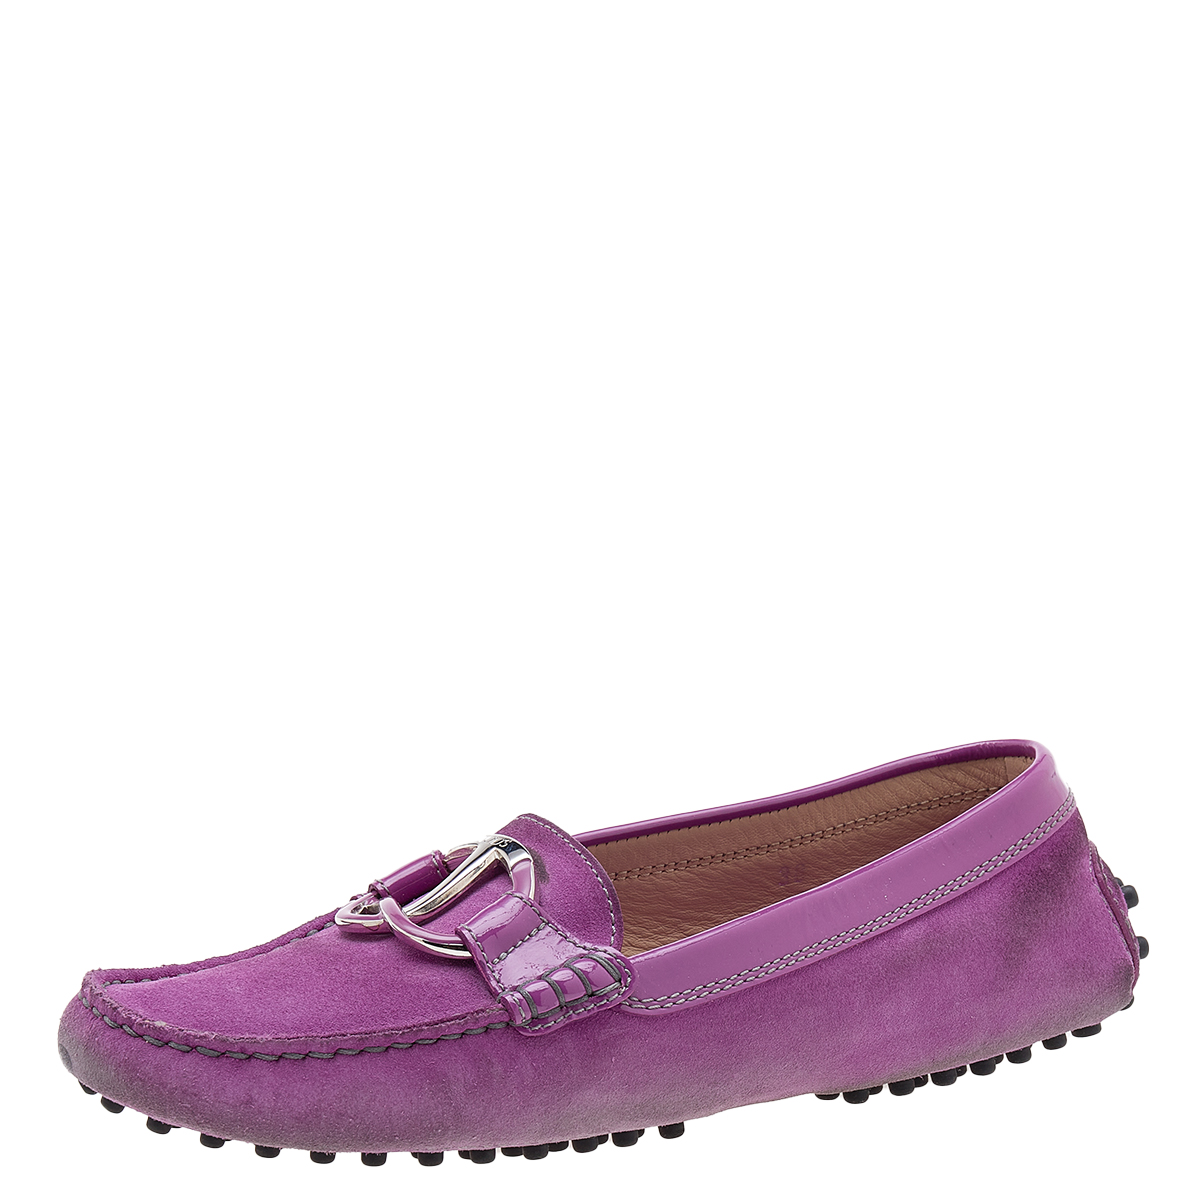 

Tod's Purple Suede And Patent Leather Trim Embellished Slip On Loafers Size